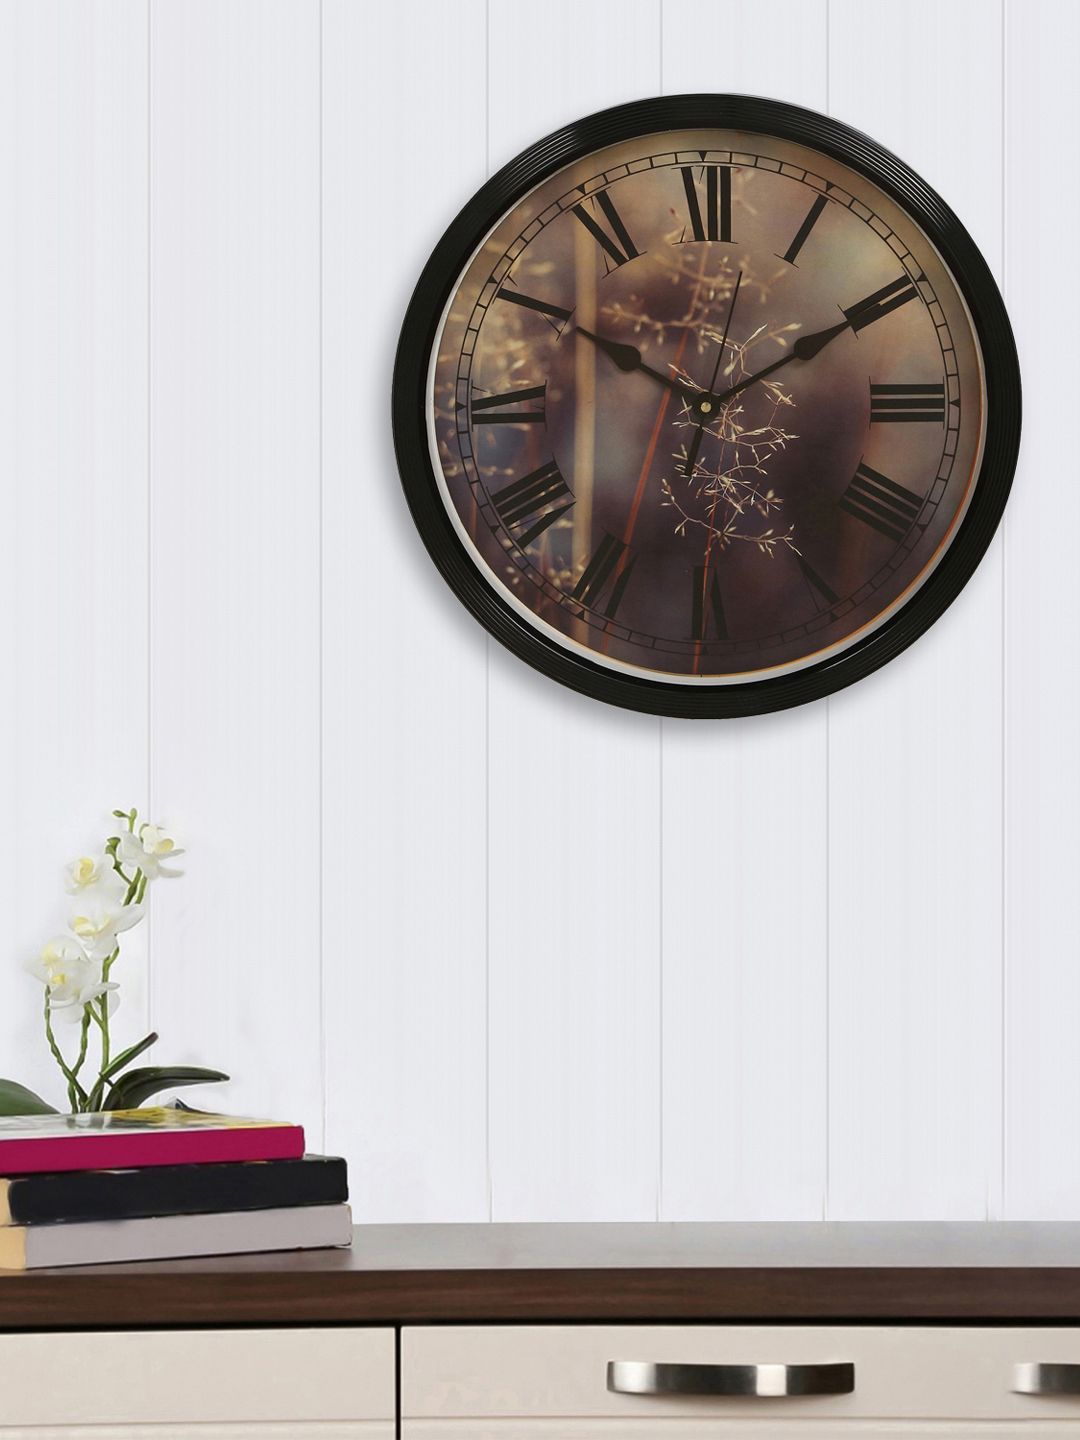 eCraftIndia Black & Brown Round Printed 31 x 31 CM Analogue Wall Clock Price in India